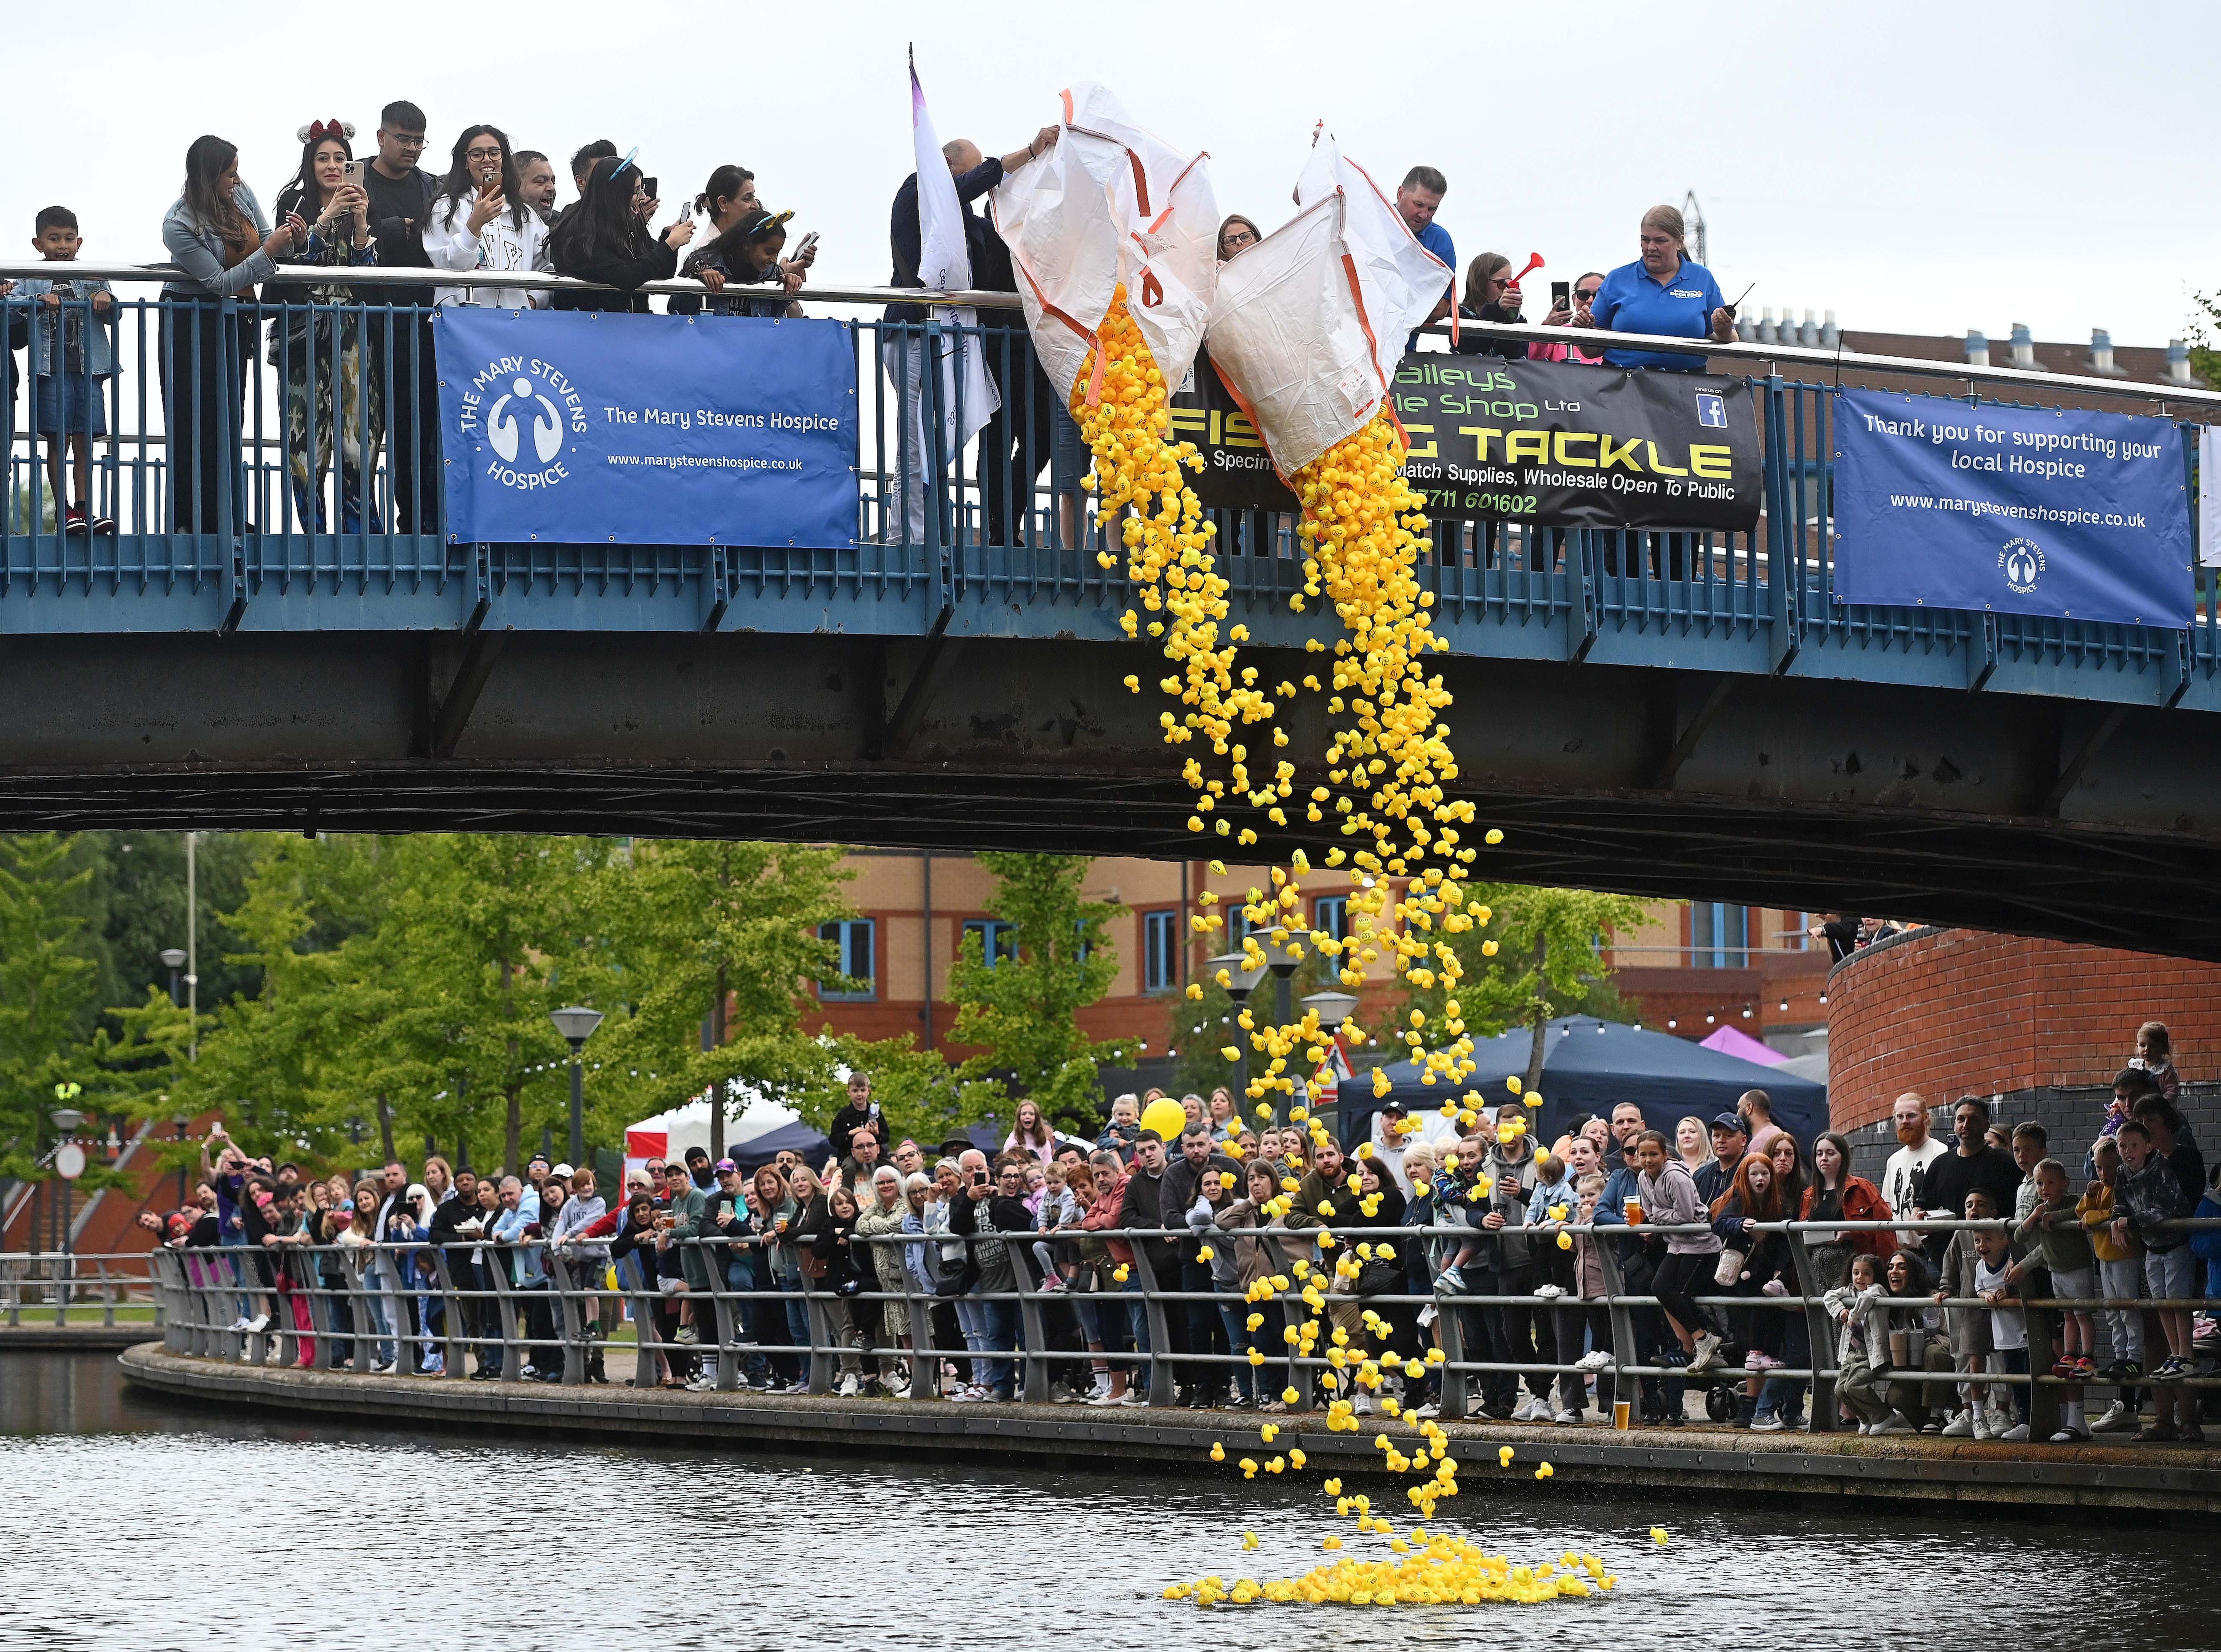 In pictures: A quacking day at The Black Country Duck Race